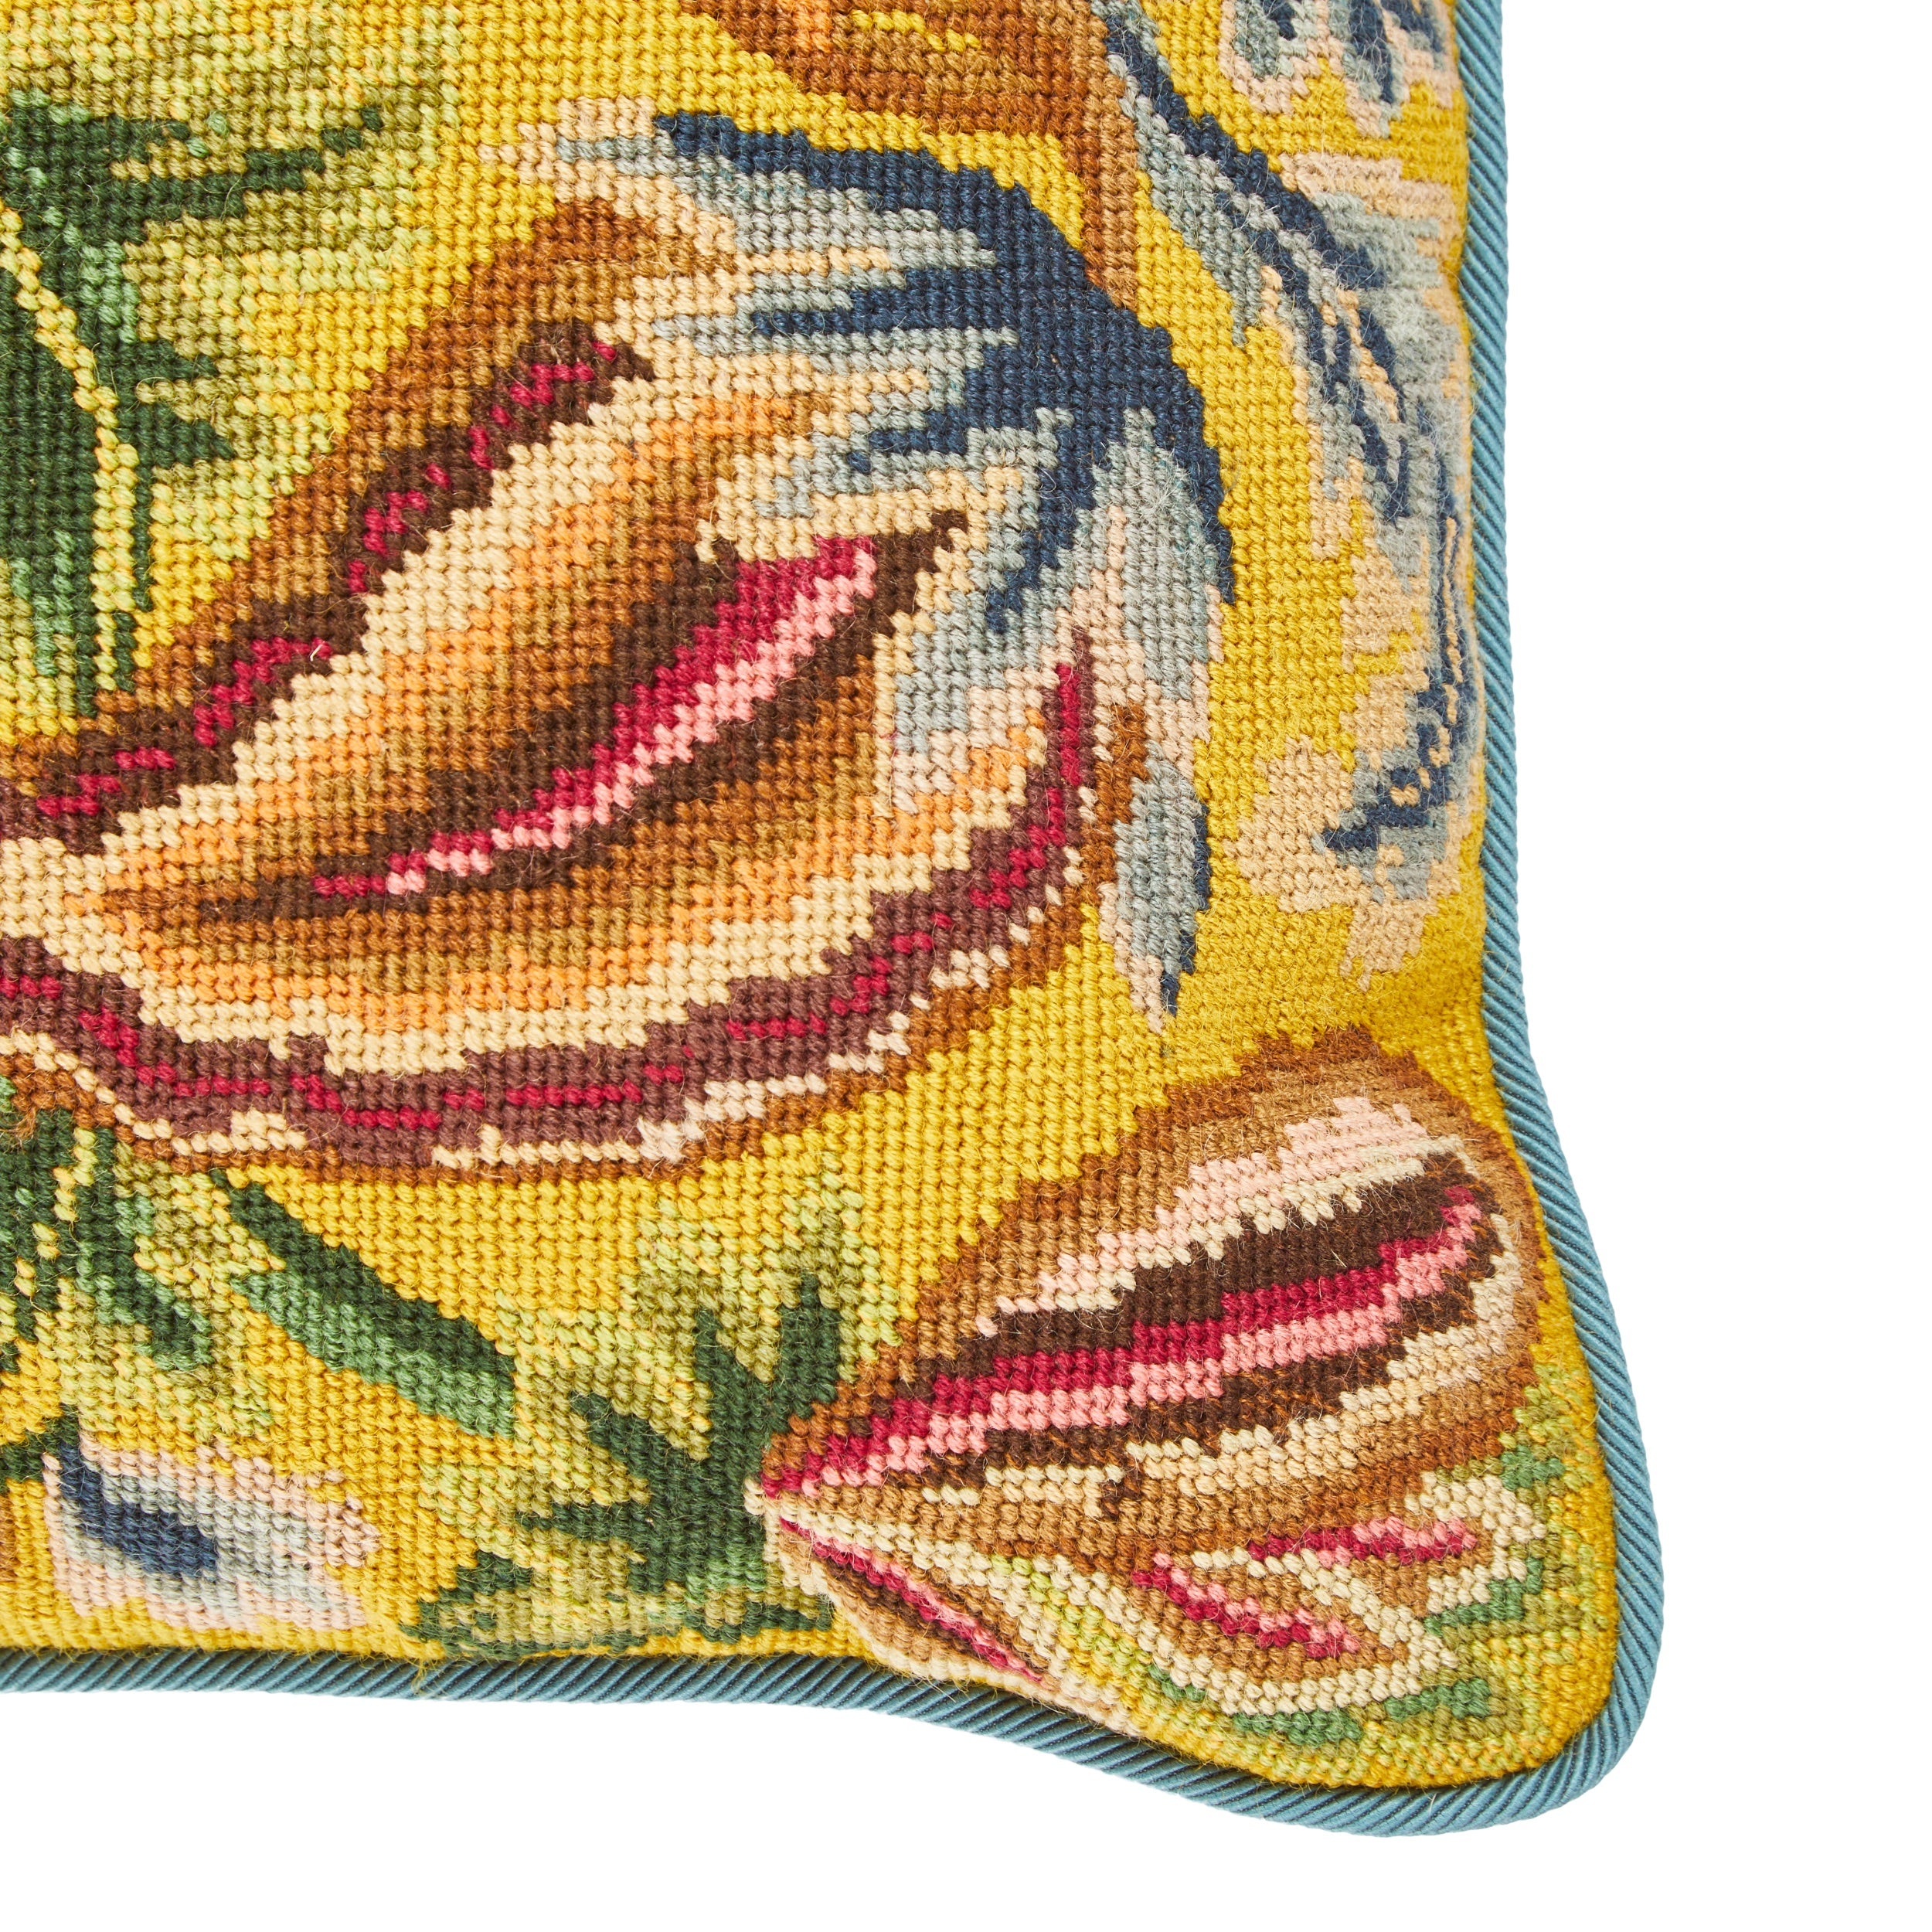 A Cushion made from Richly Coloured 20th Century English Needlework with Dark Teal Wool Piping